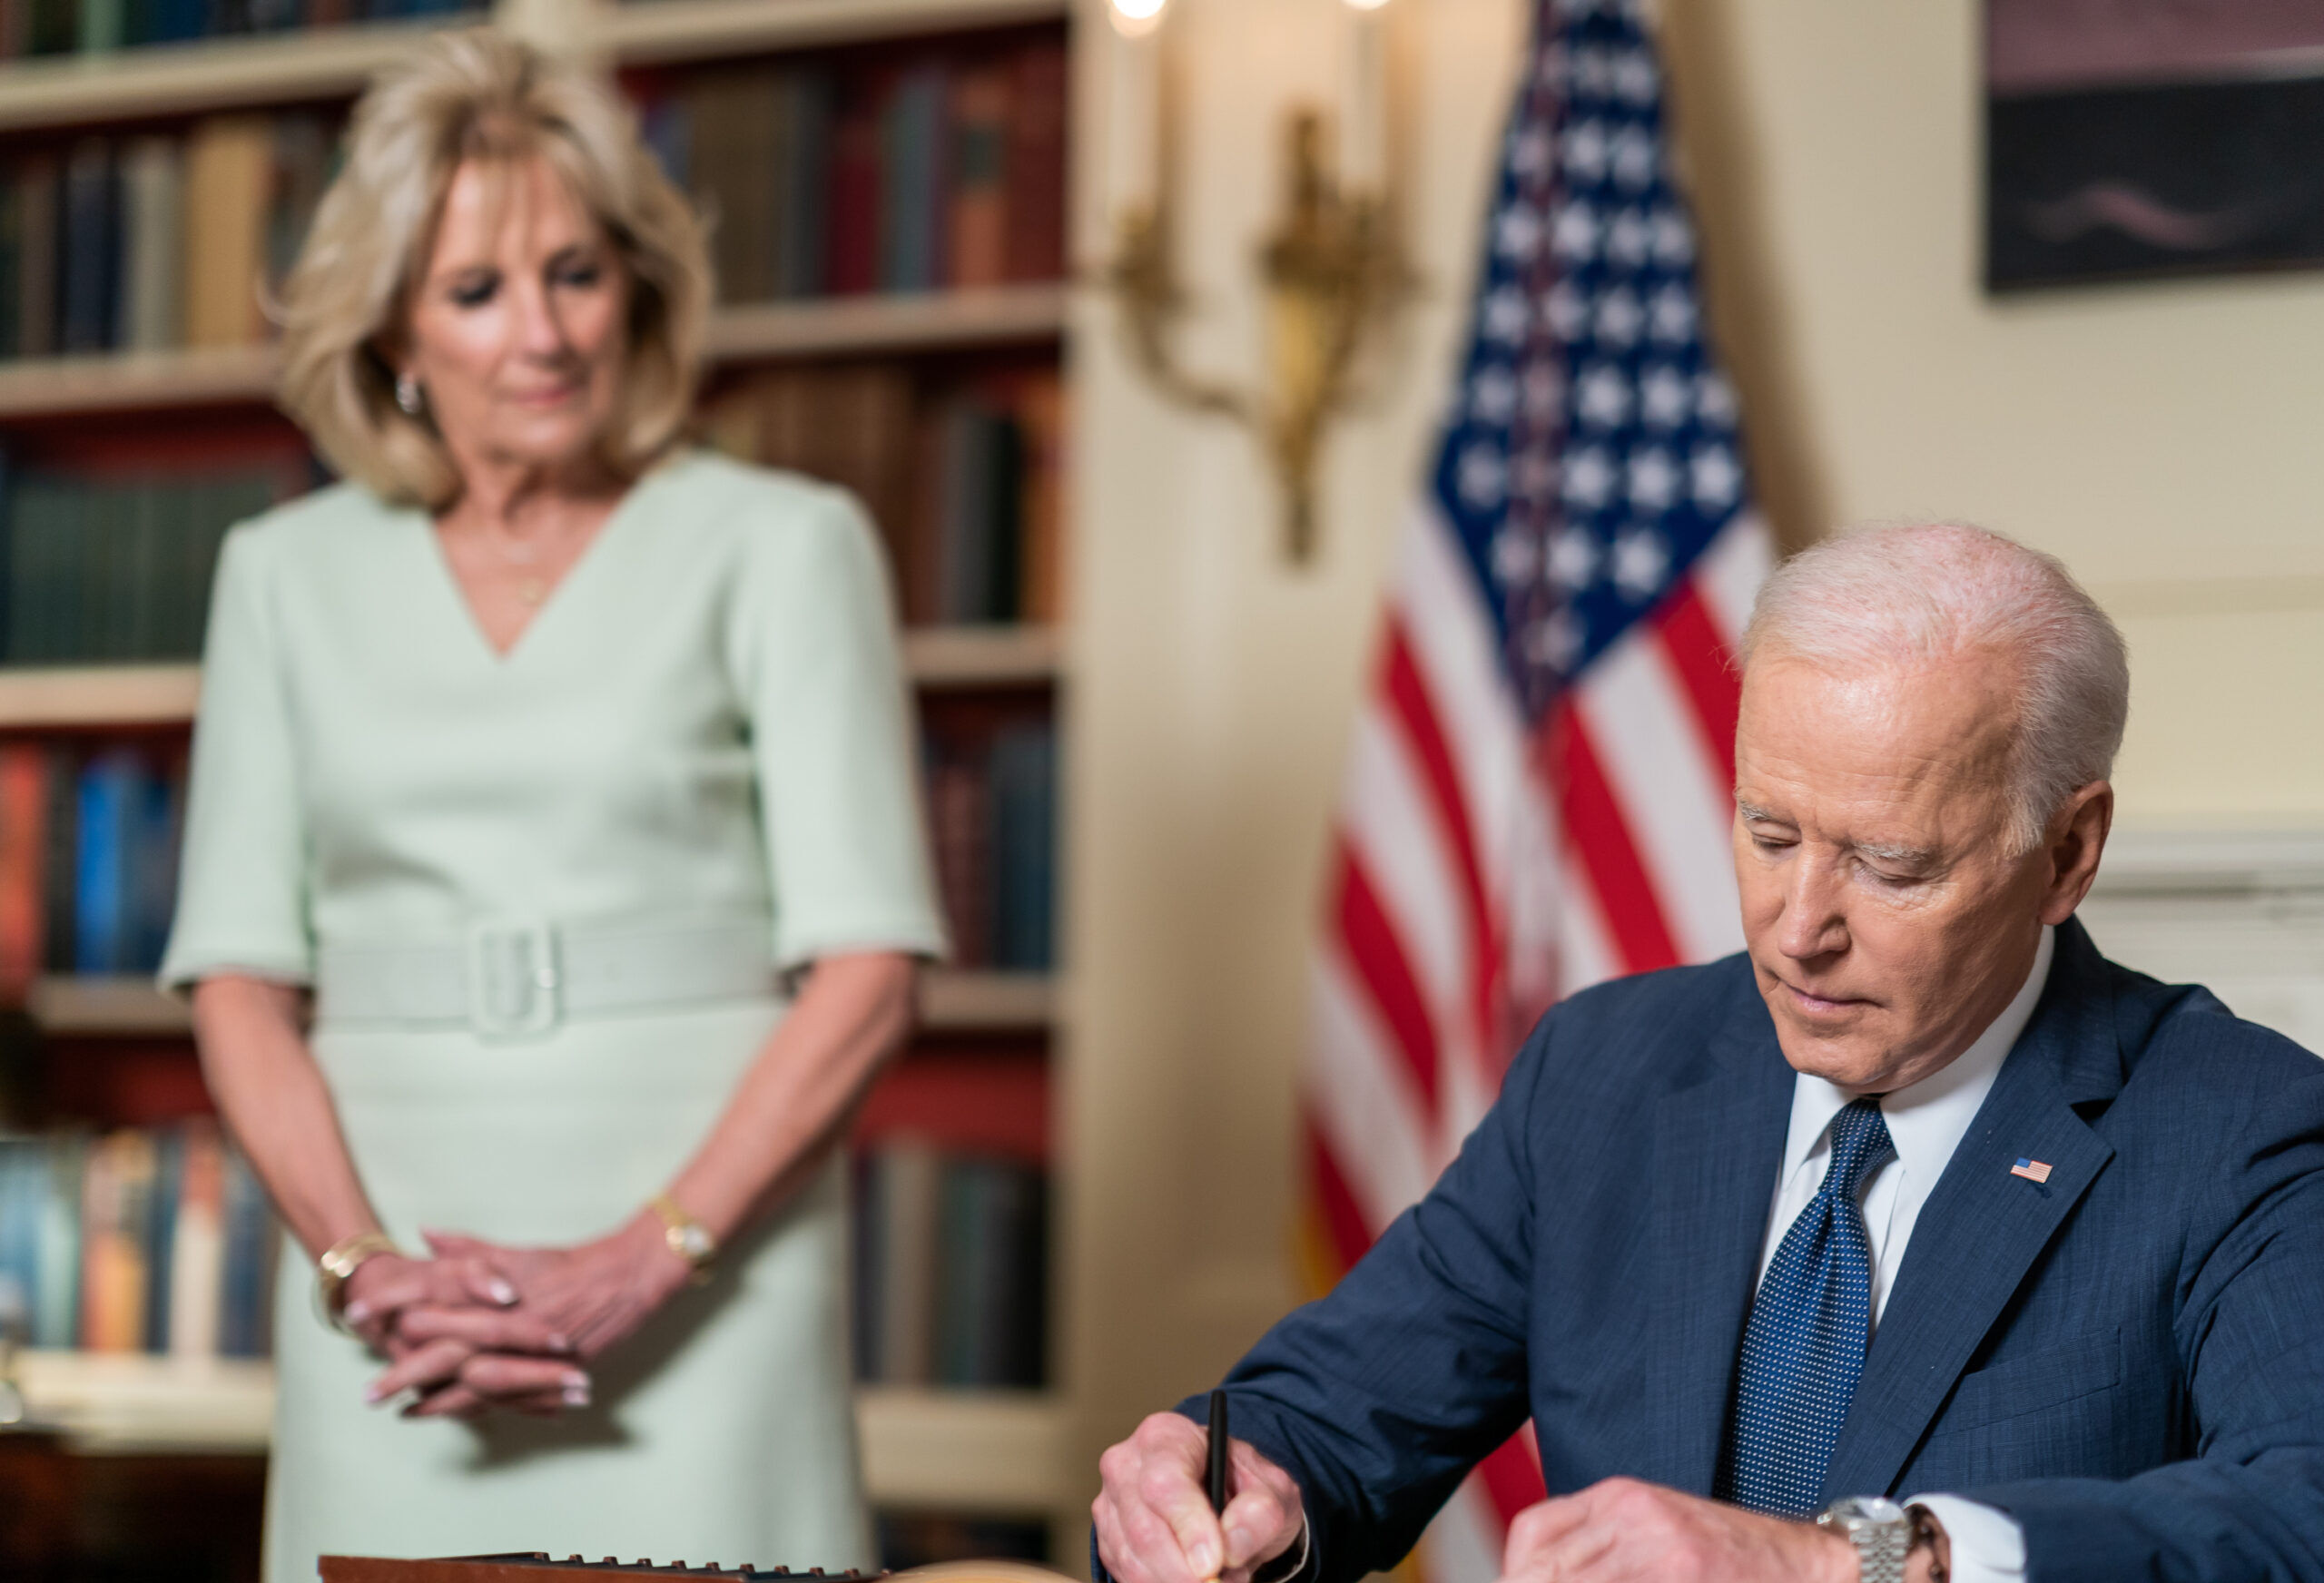 President Joe Biden, joined by First Lady Jill Biden, signs the Month of the Military Child Proclamation Wednesday, March 31, 2021, in the Library of the White House. (Official White House Photo by Adam Schultz)